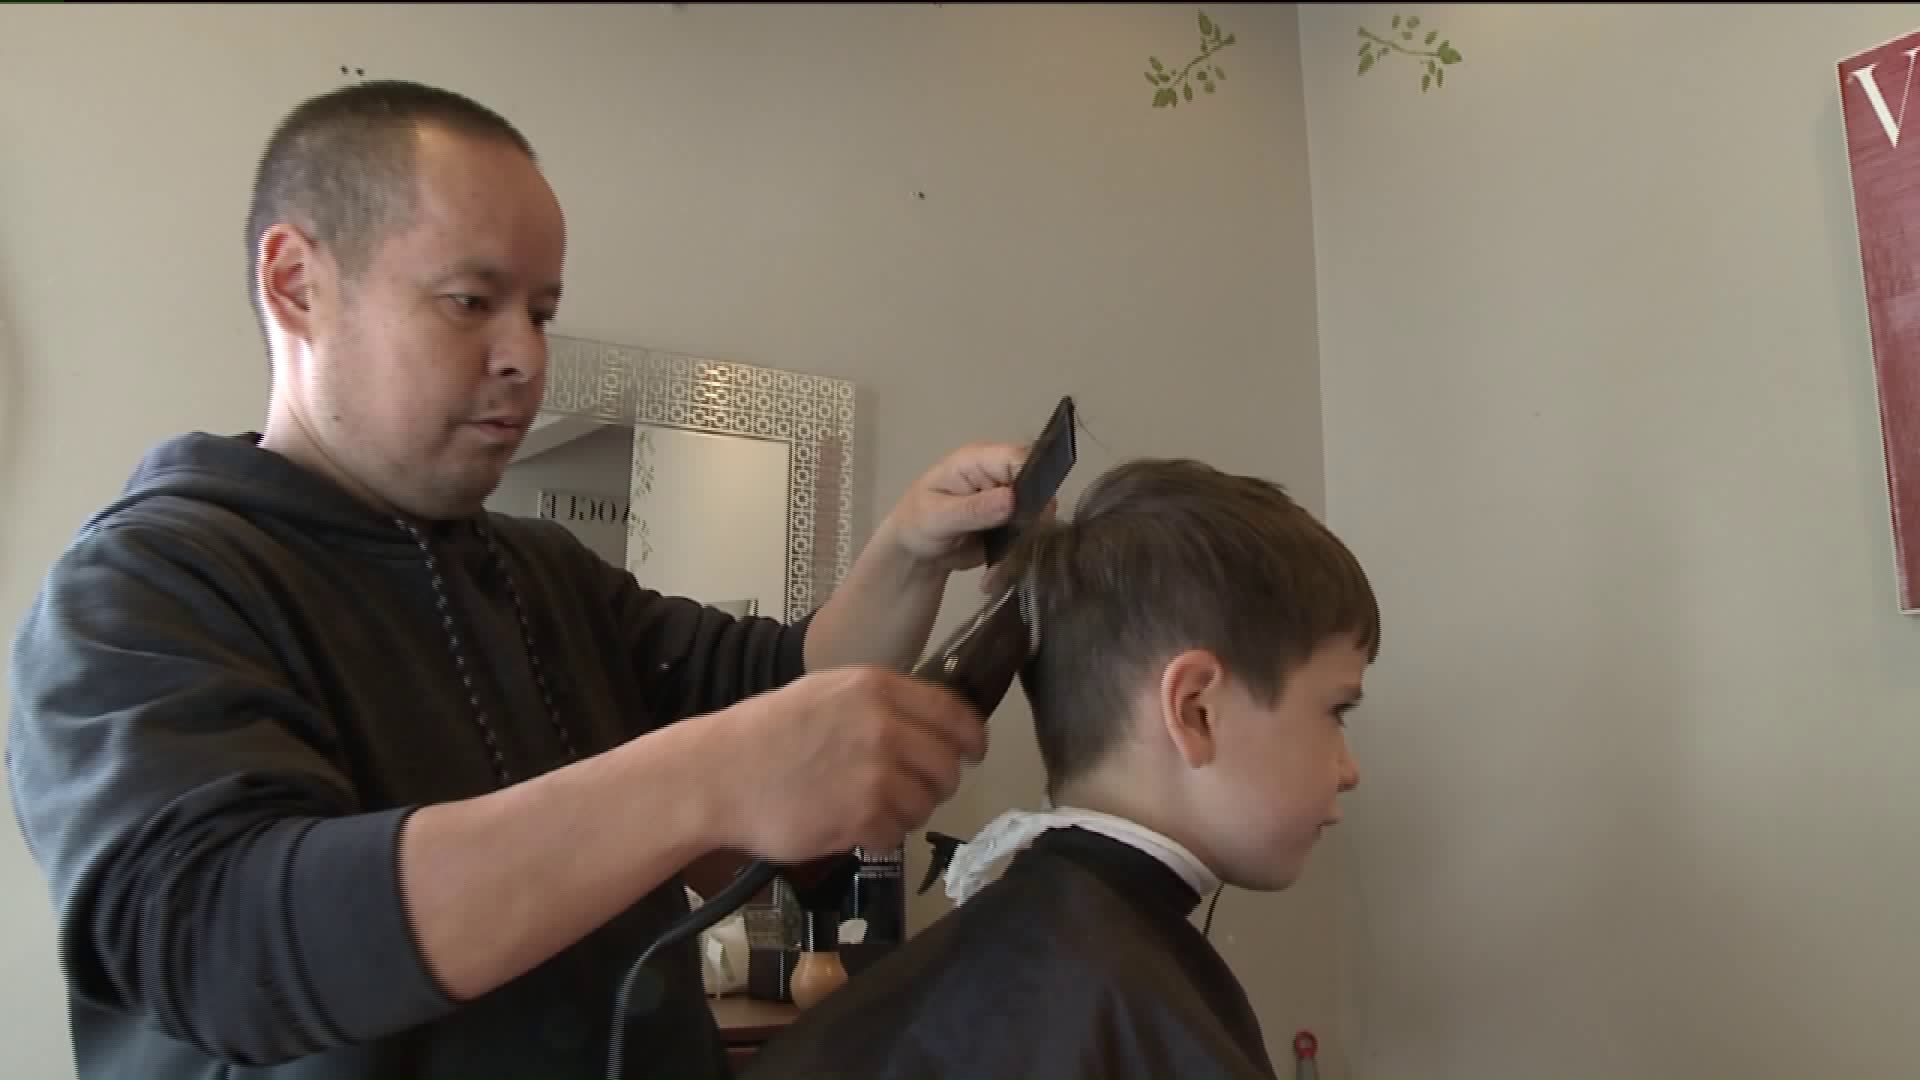 Cuts for a Cause: Laflin Barber Raising Money for Brothers Killed in Fire